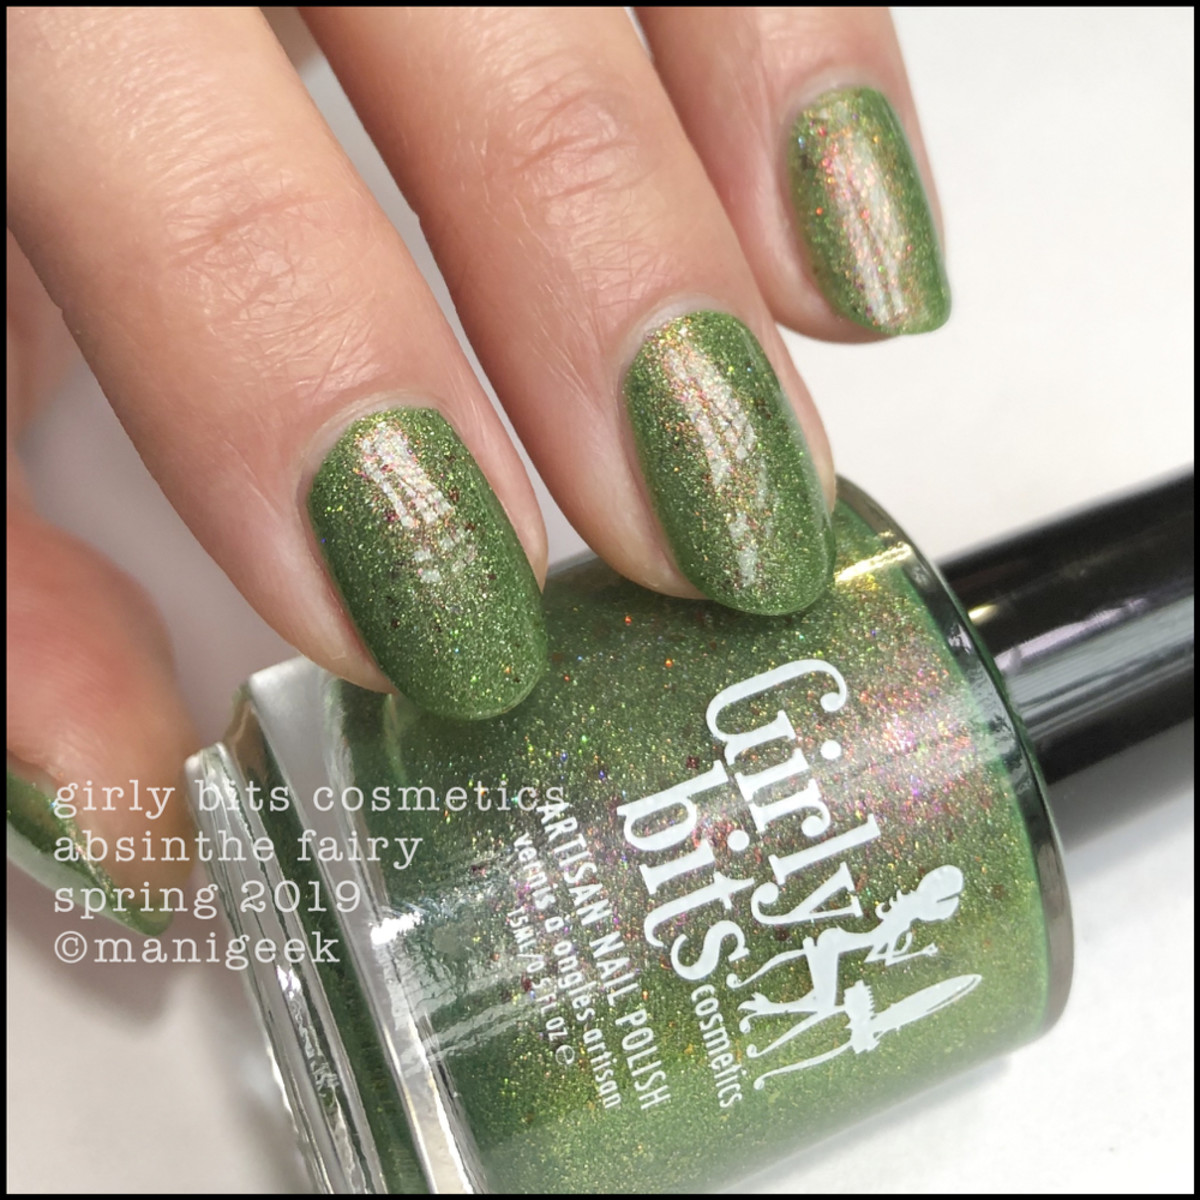 Girly Bits Absinthe Fairy - Girly Bits Cosmetics Spring 2019 Collection